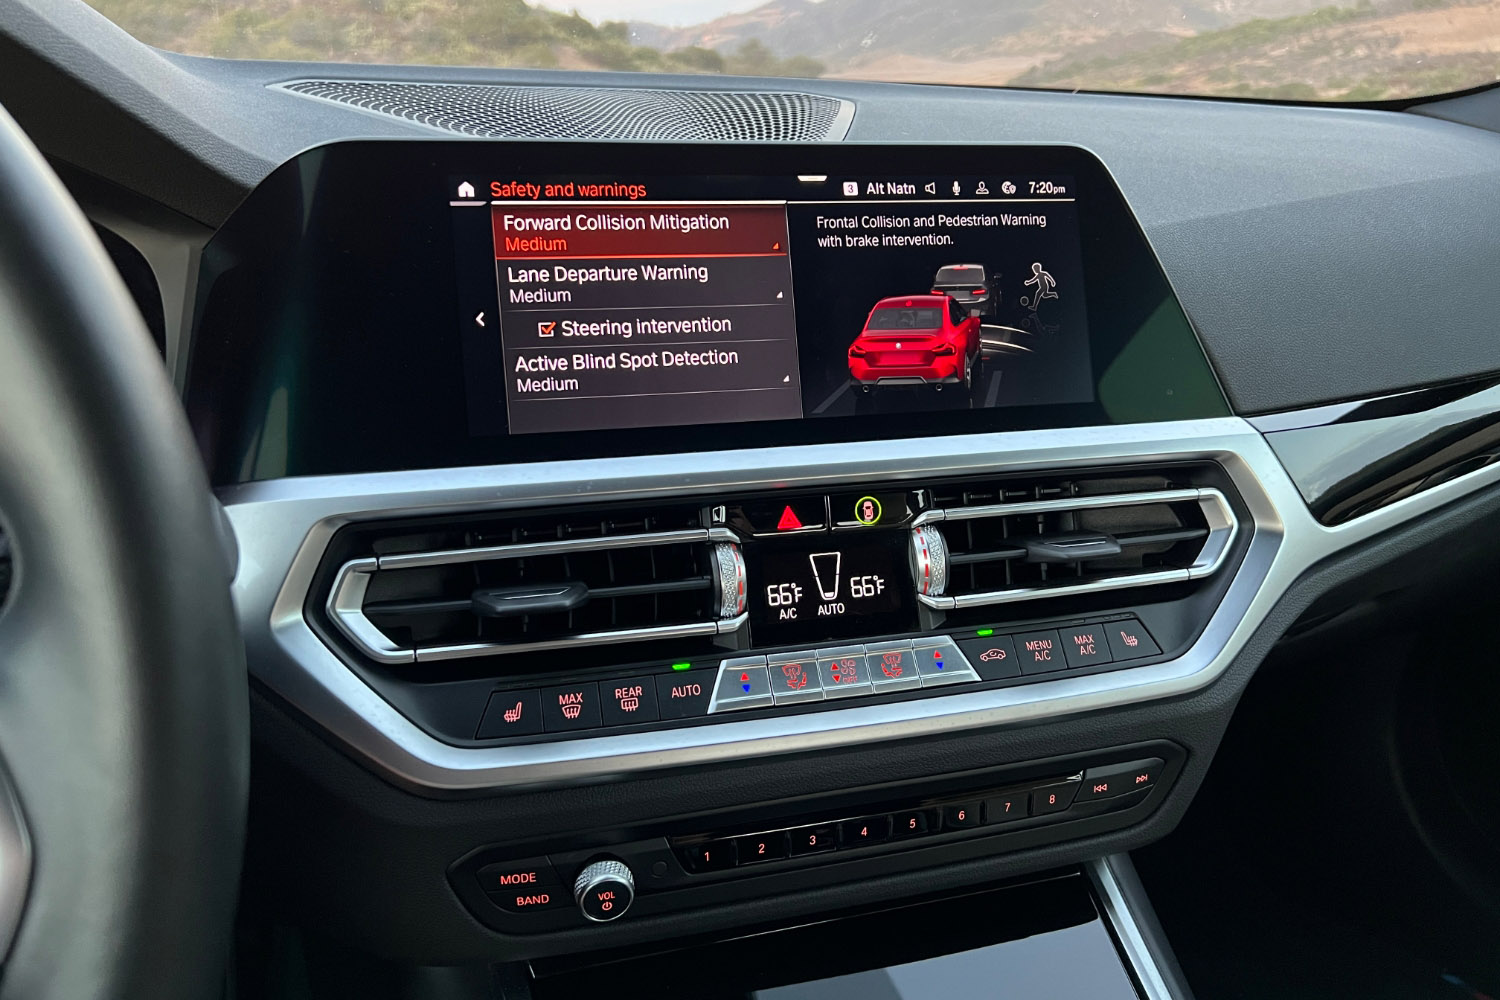 2022 BMW 2 Series Coupe safety features